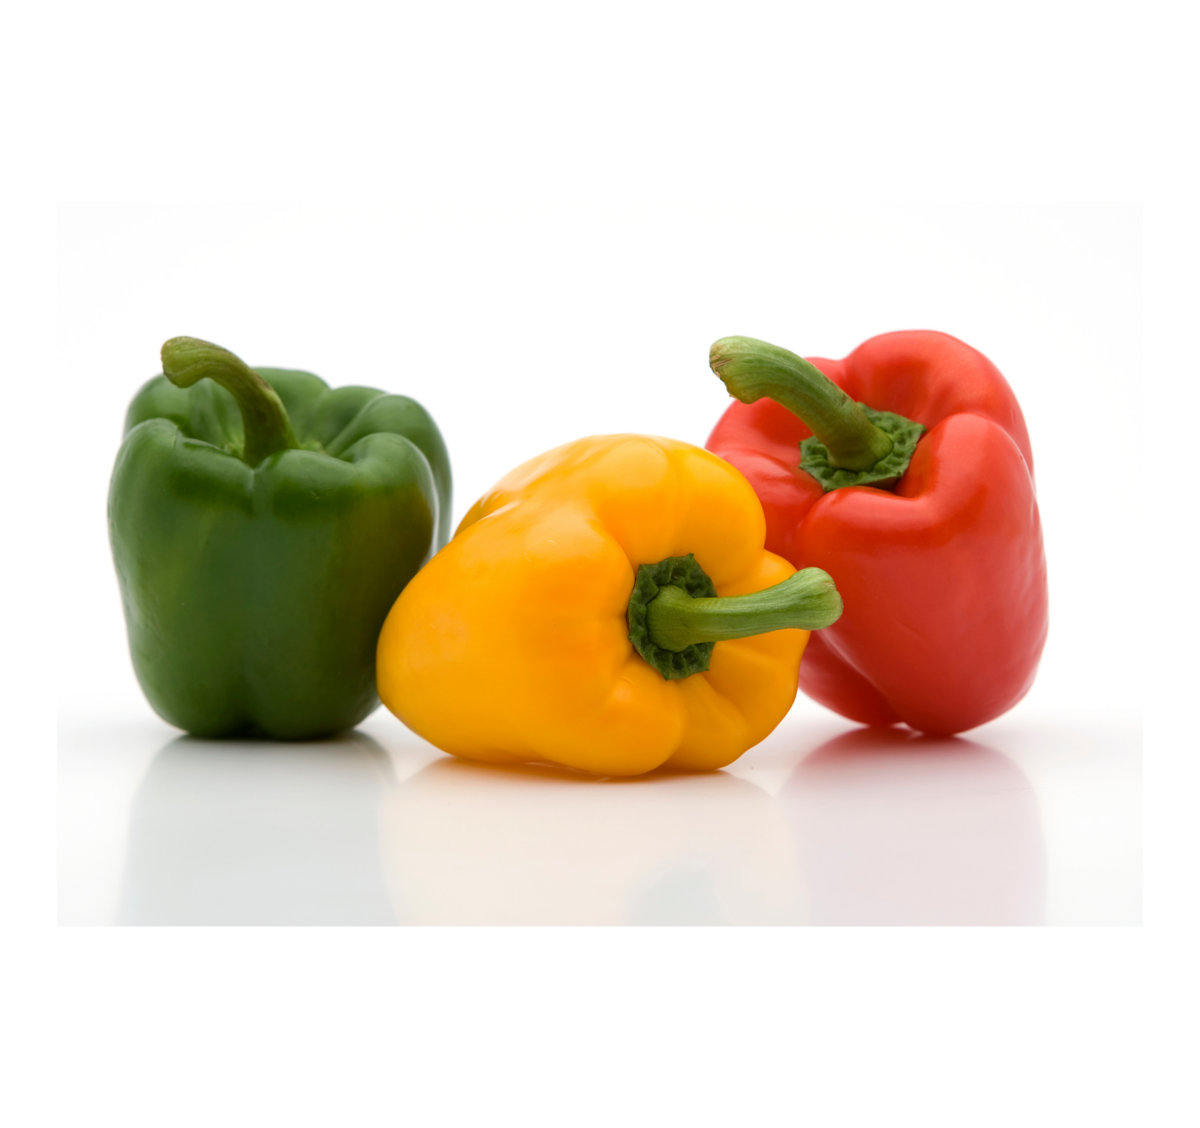 Bell pepper cultivation for the best quality bell pepper